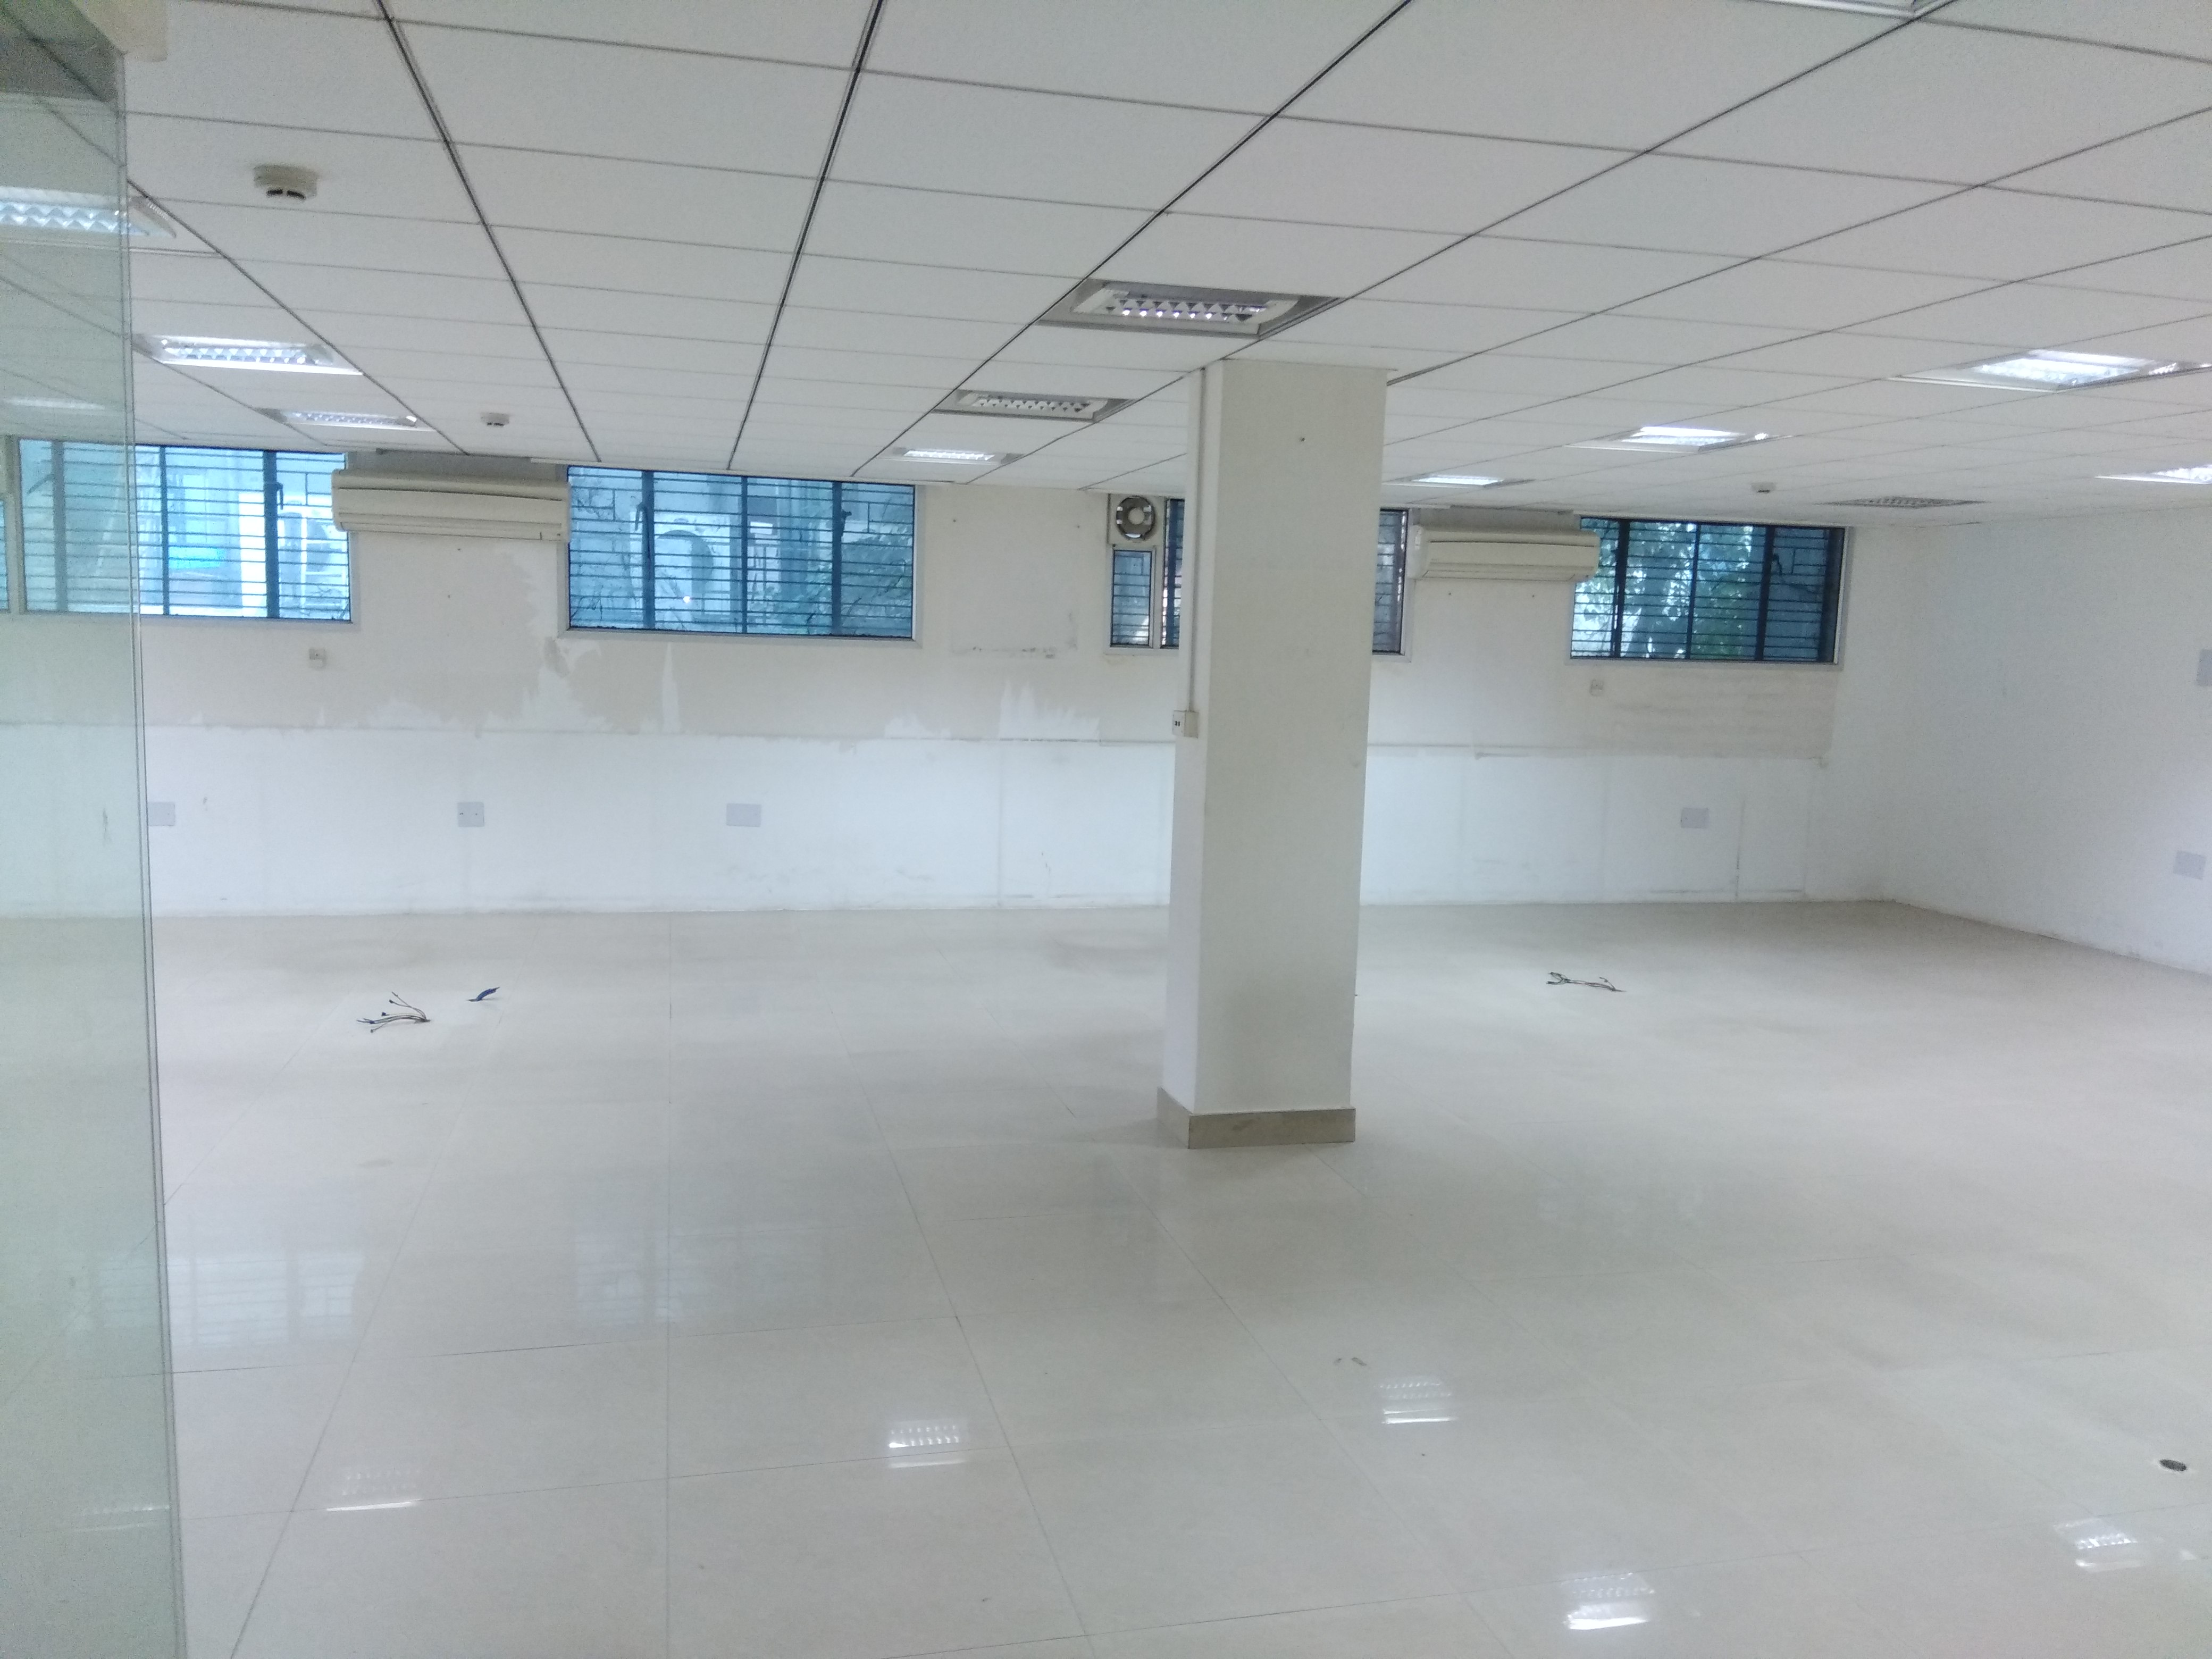 Commercial Office space for Lease Independent Built Up Sector 32 |  Unfurnished Commercial Office space Gurgaon